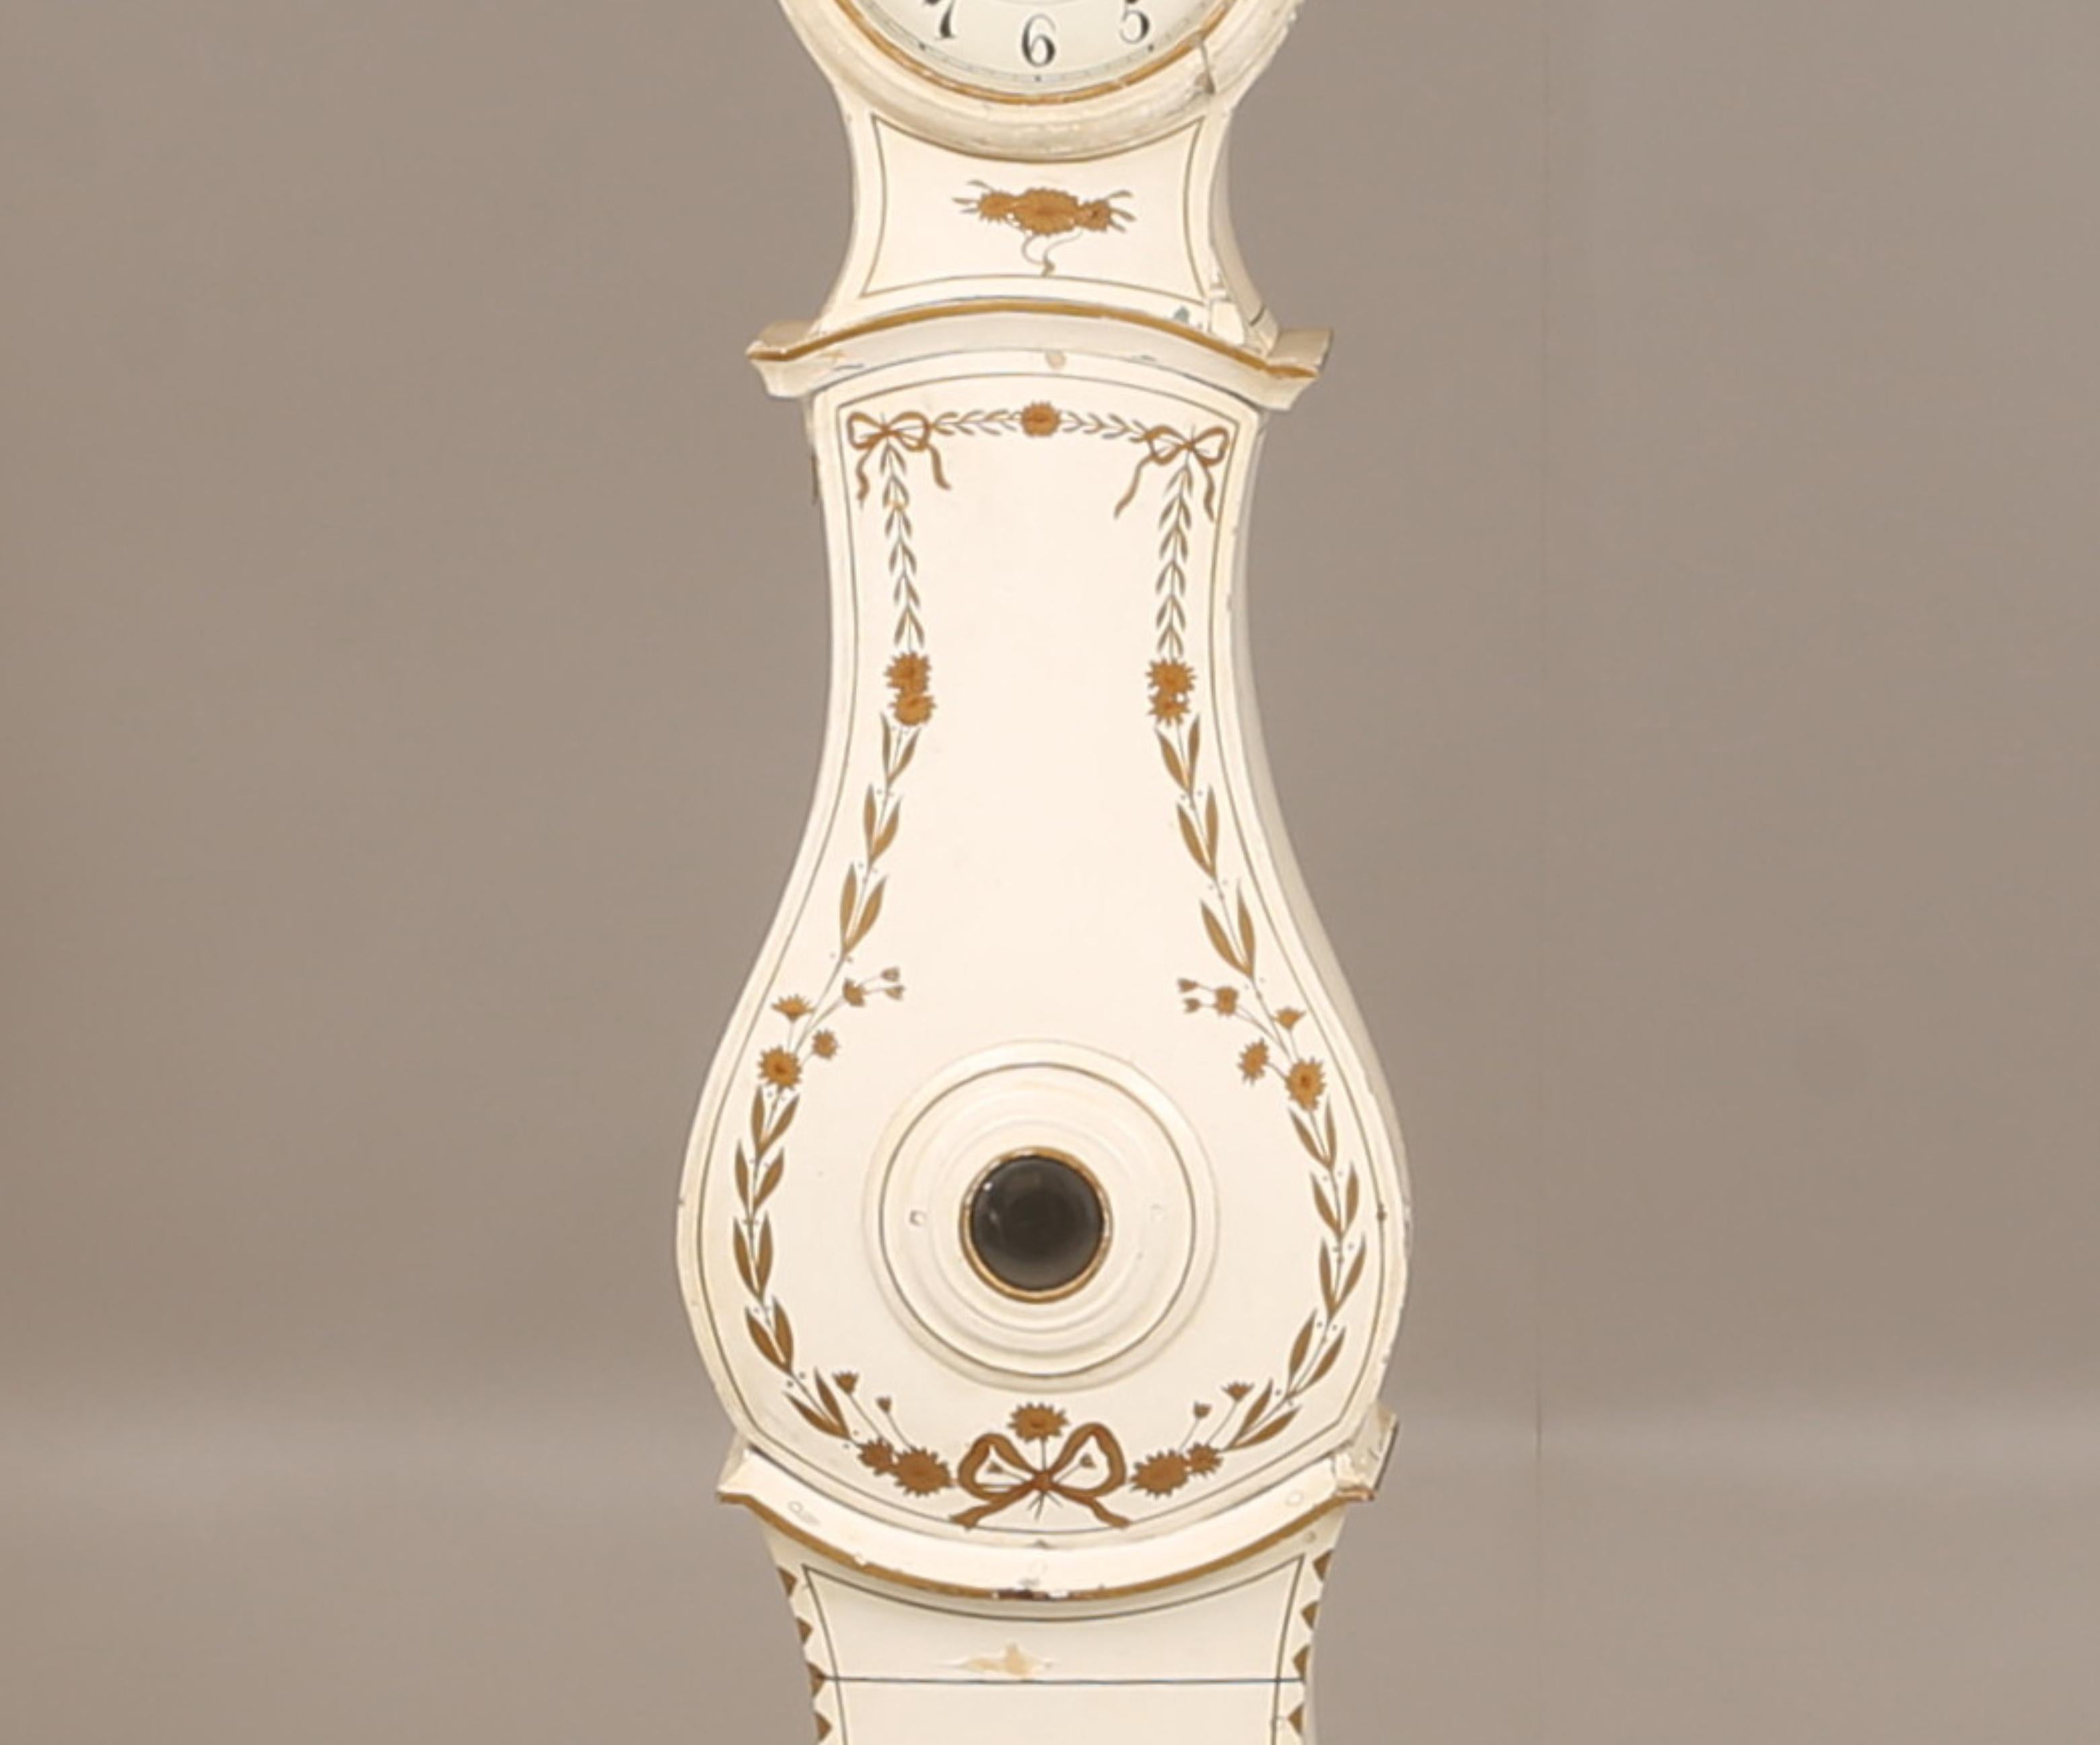 Swedish antique mora clock in the Svangd School finished in white paint with gold edge detailing and curlicues.

This unusual mora clock has interesting crown motif and a great body shape.

It stands 224cm tall approximate and has a fairly heavy